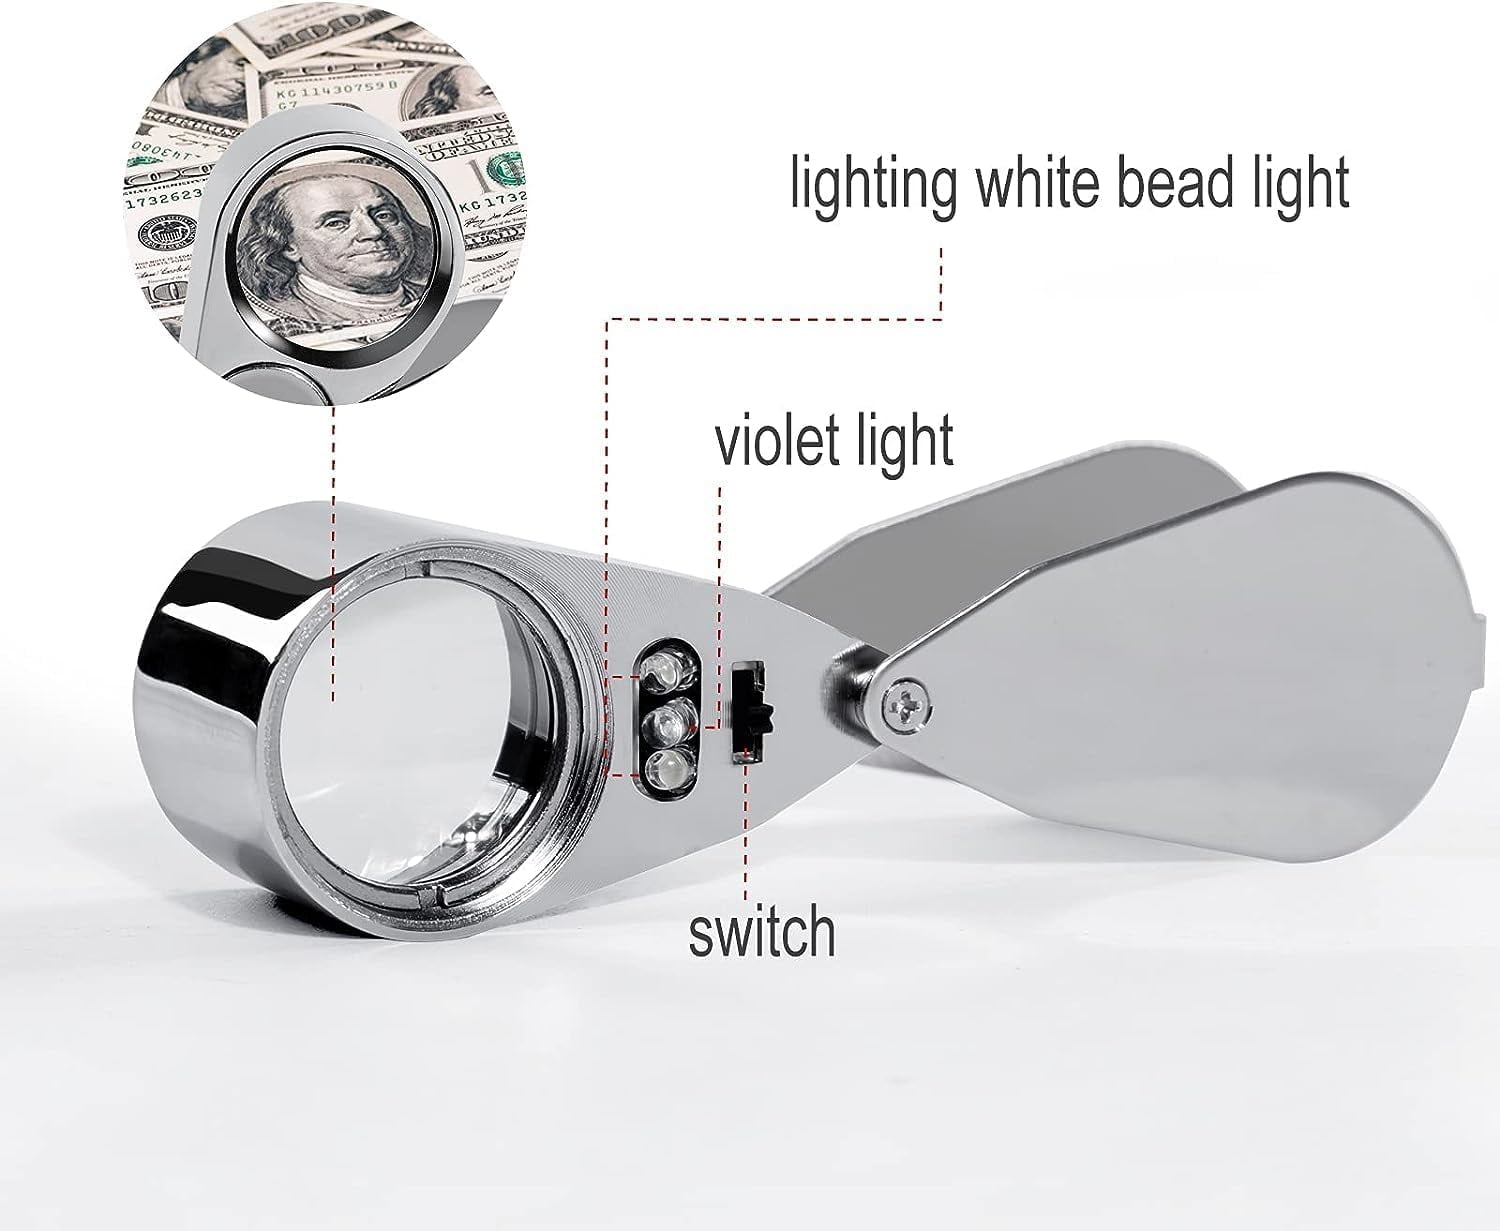 40X Full Metal Illuminated Jewelers Loupe Magnifier with Folding Design,  Pocket Magnifying Glass with LED and UV Light (LED Currency